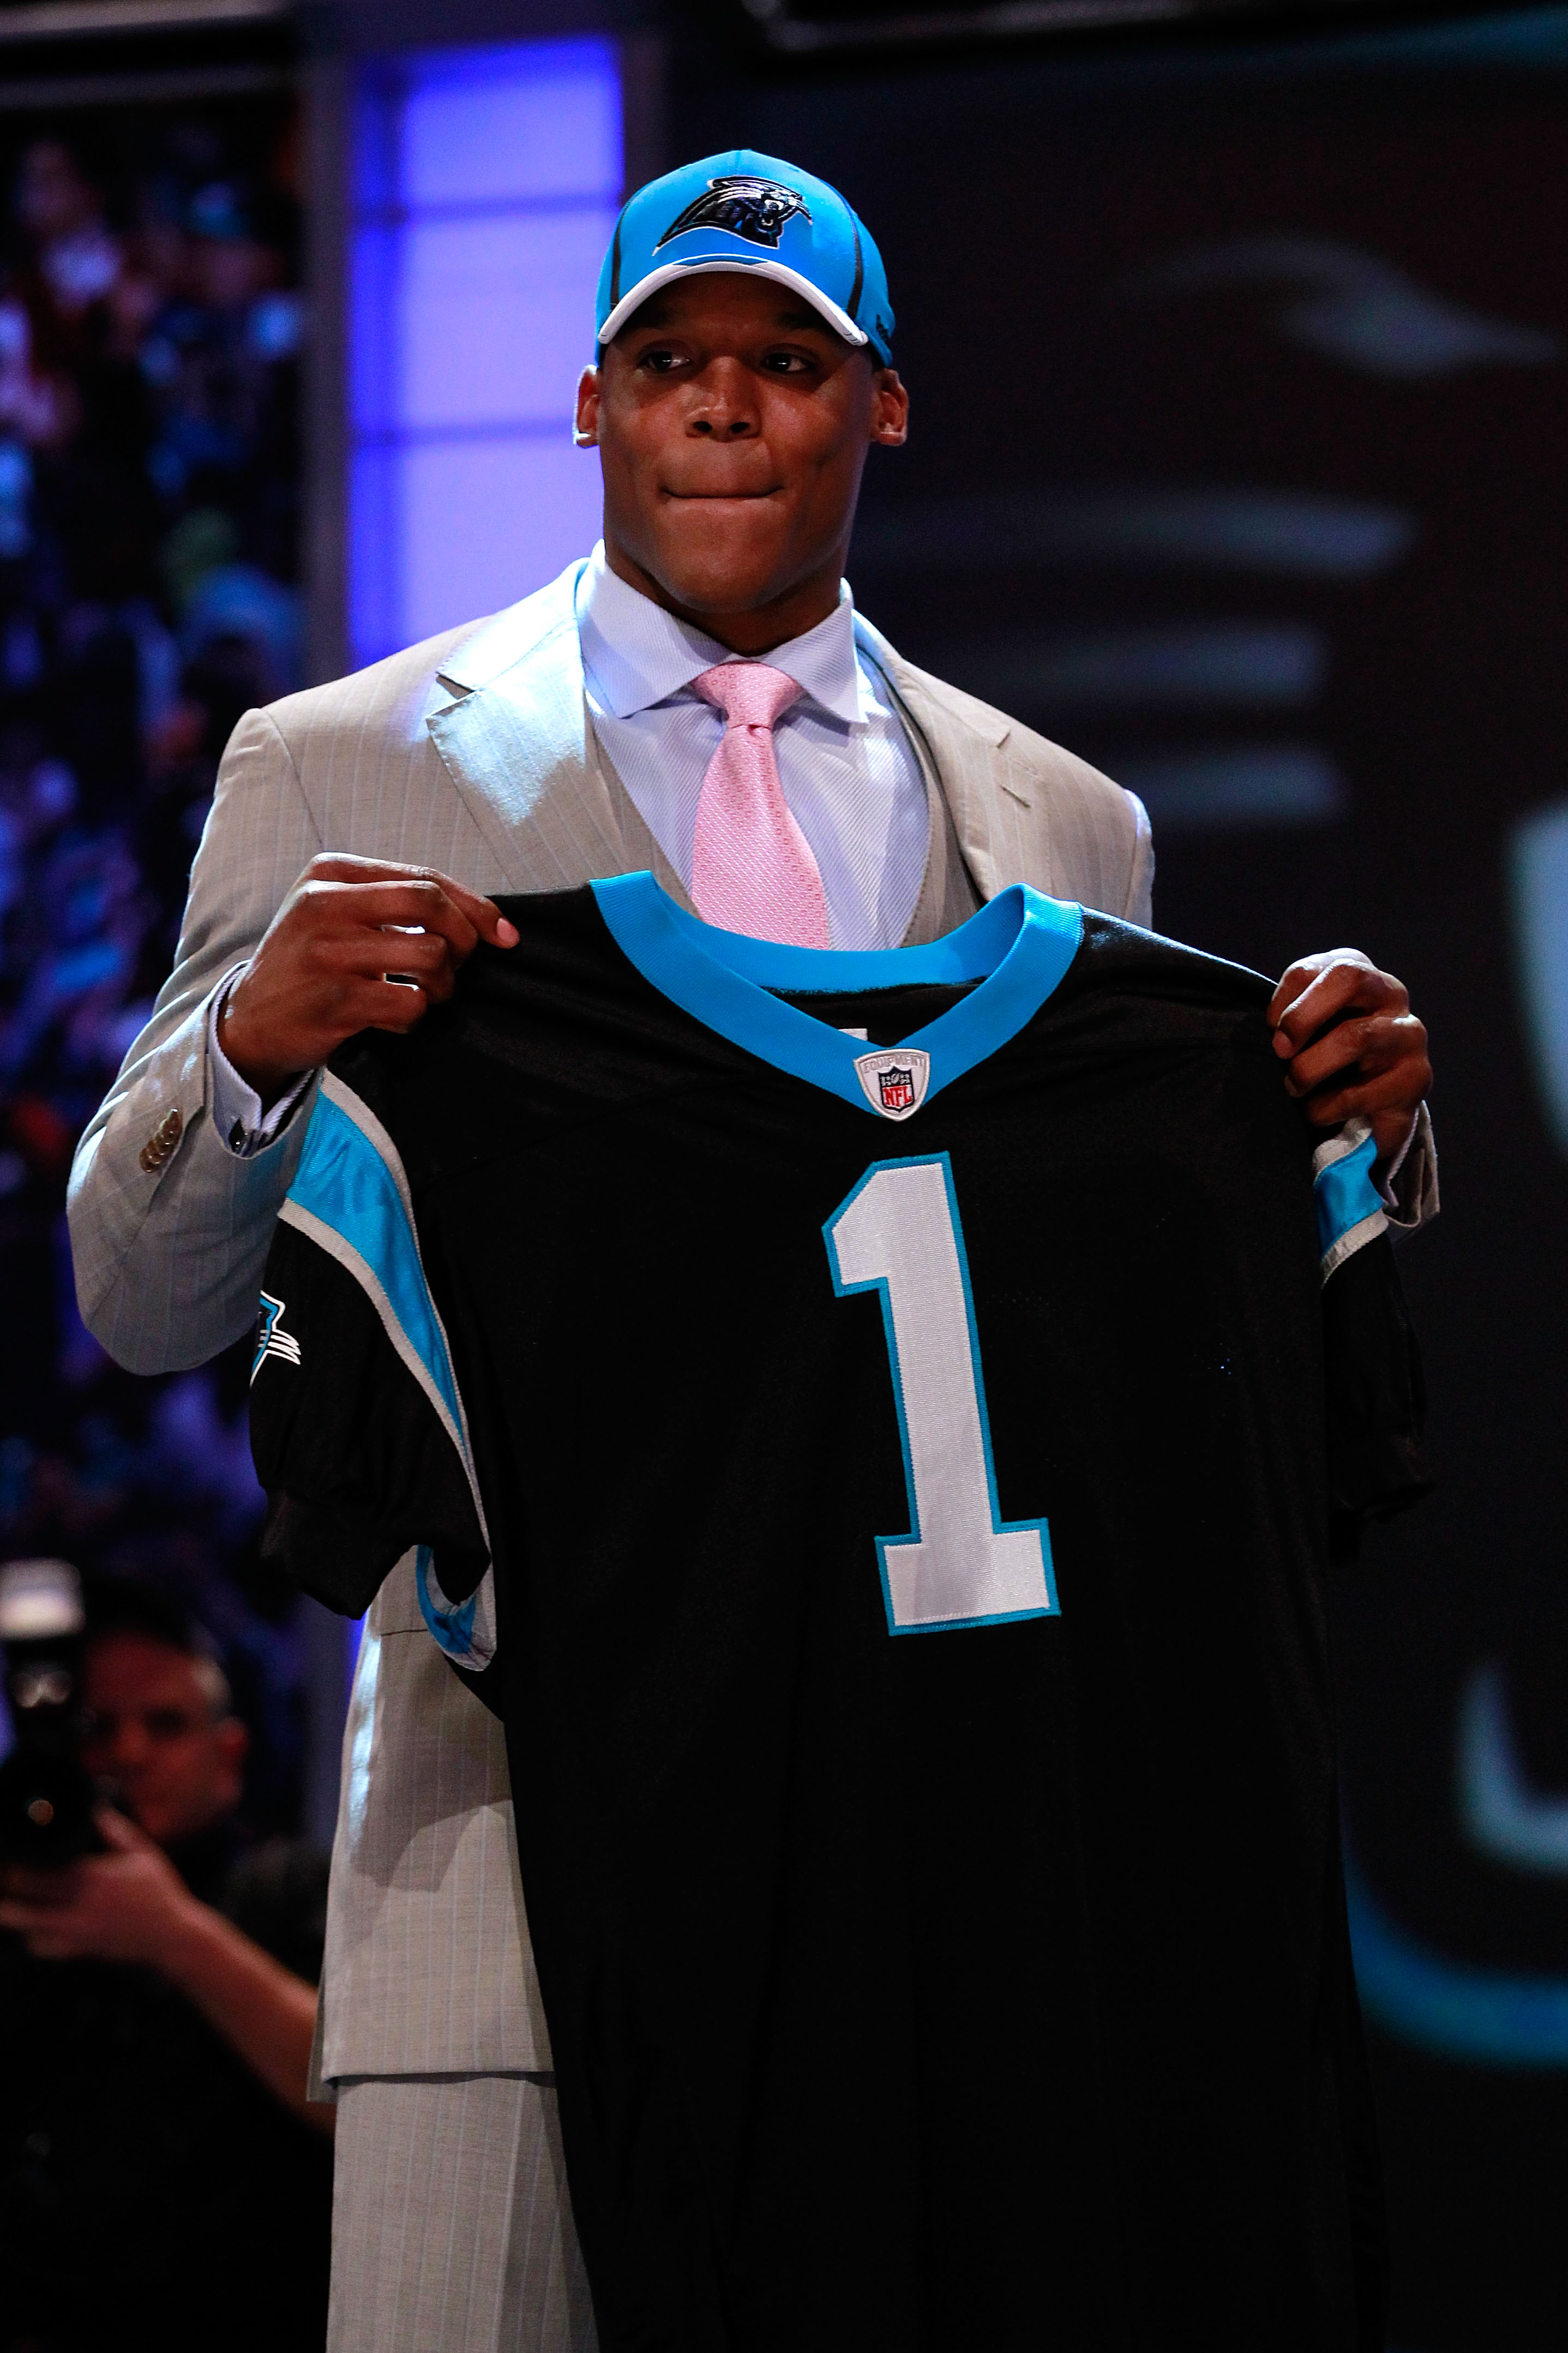 NEW YORK, NY - APRIL 28:  Cam Newton, #1 overall pick by the Carolina Panthers holds up a jersey on stage after he was picked during the 2011 NFL Draft at Radio City Music Hall on April 28, 2011 in New York City.  (Photo by Chris Trotman/Getty Images)